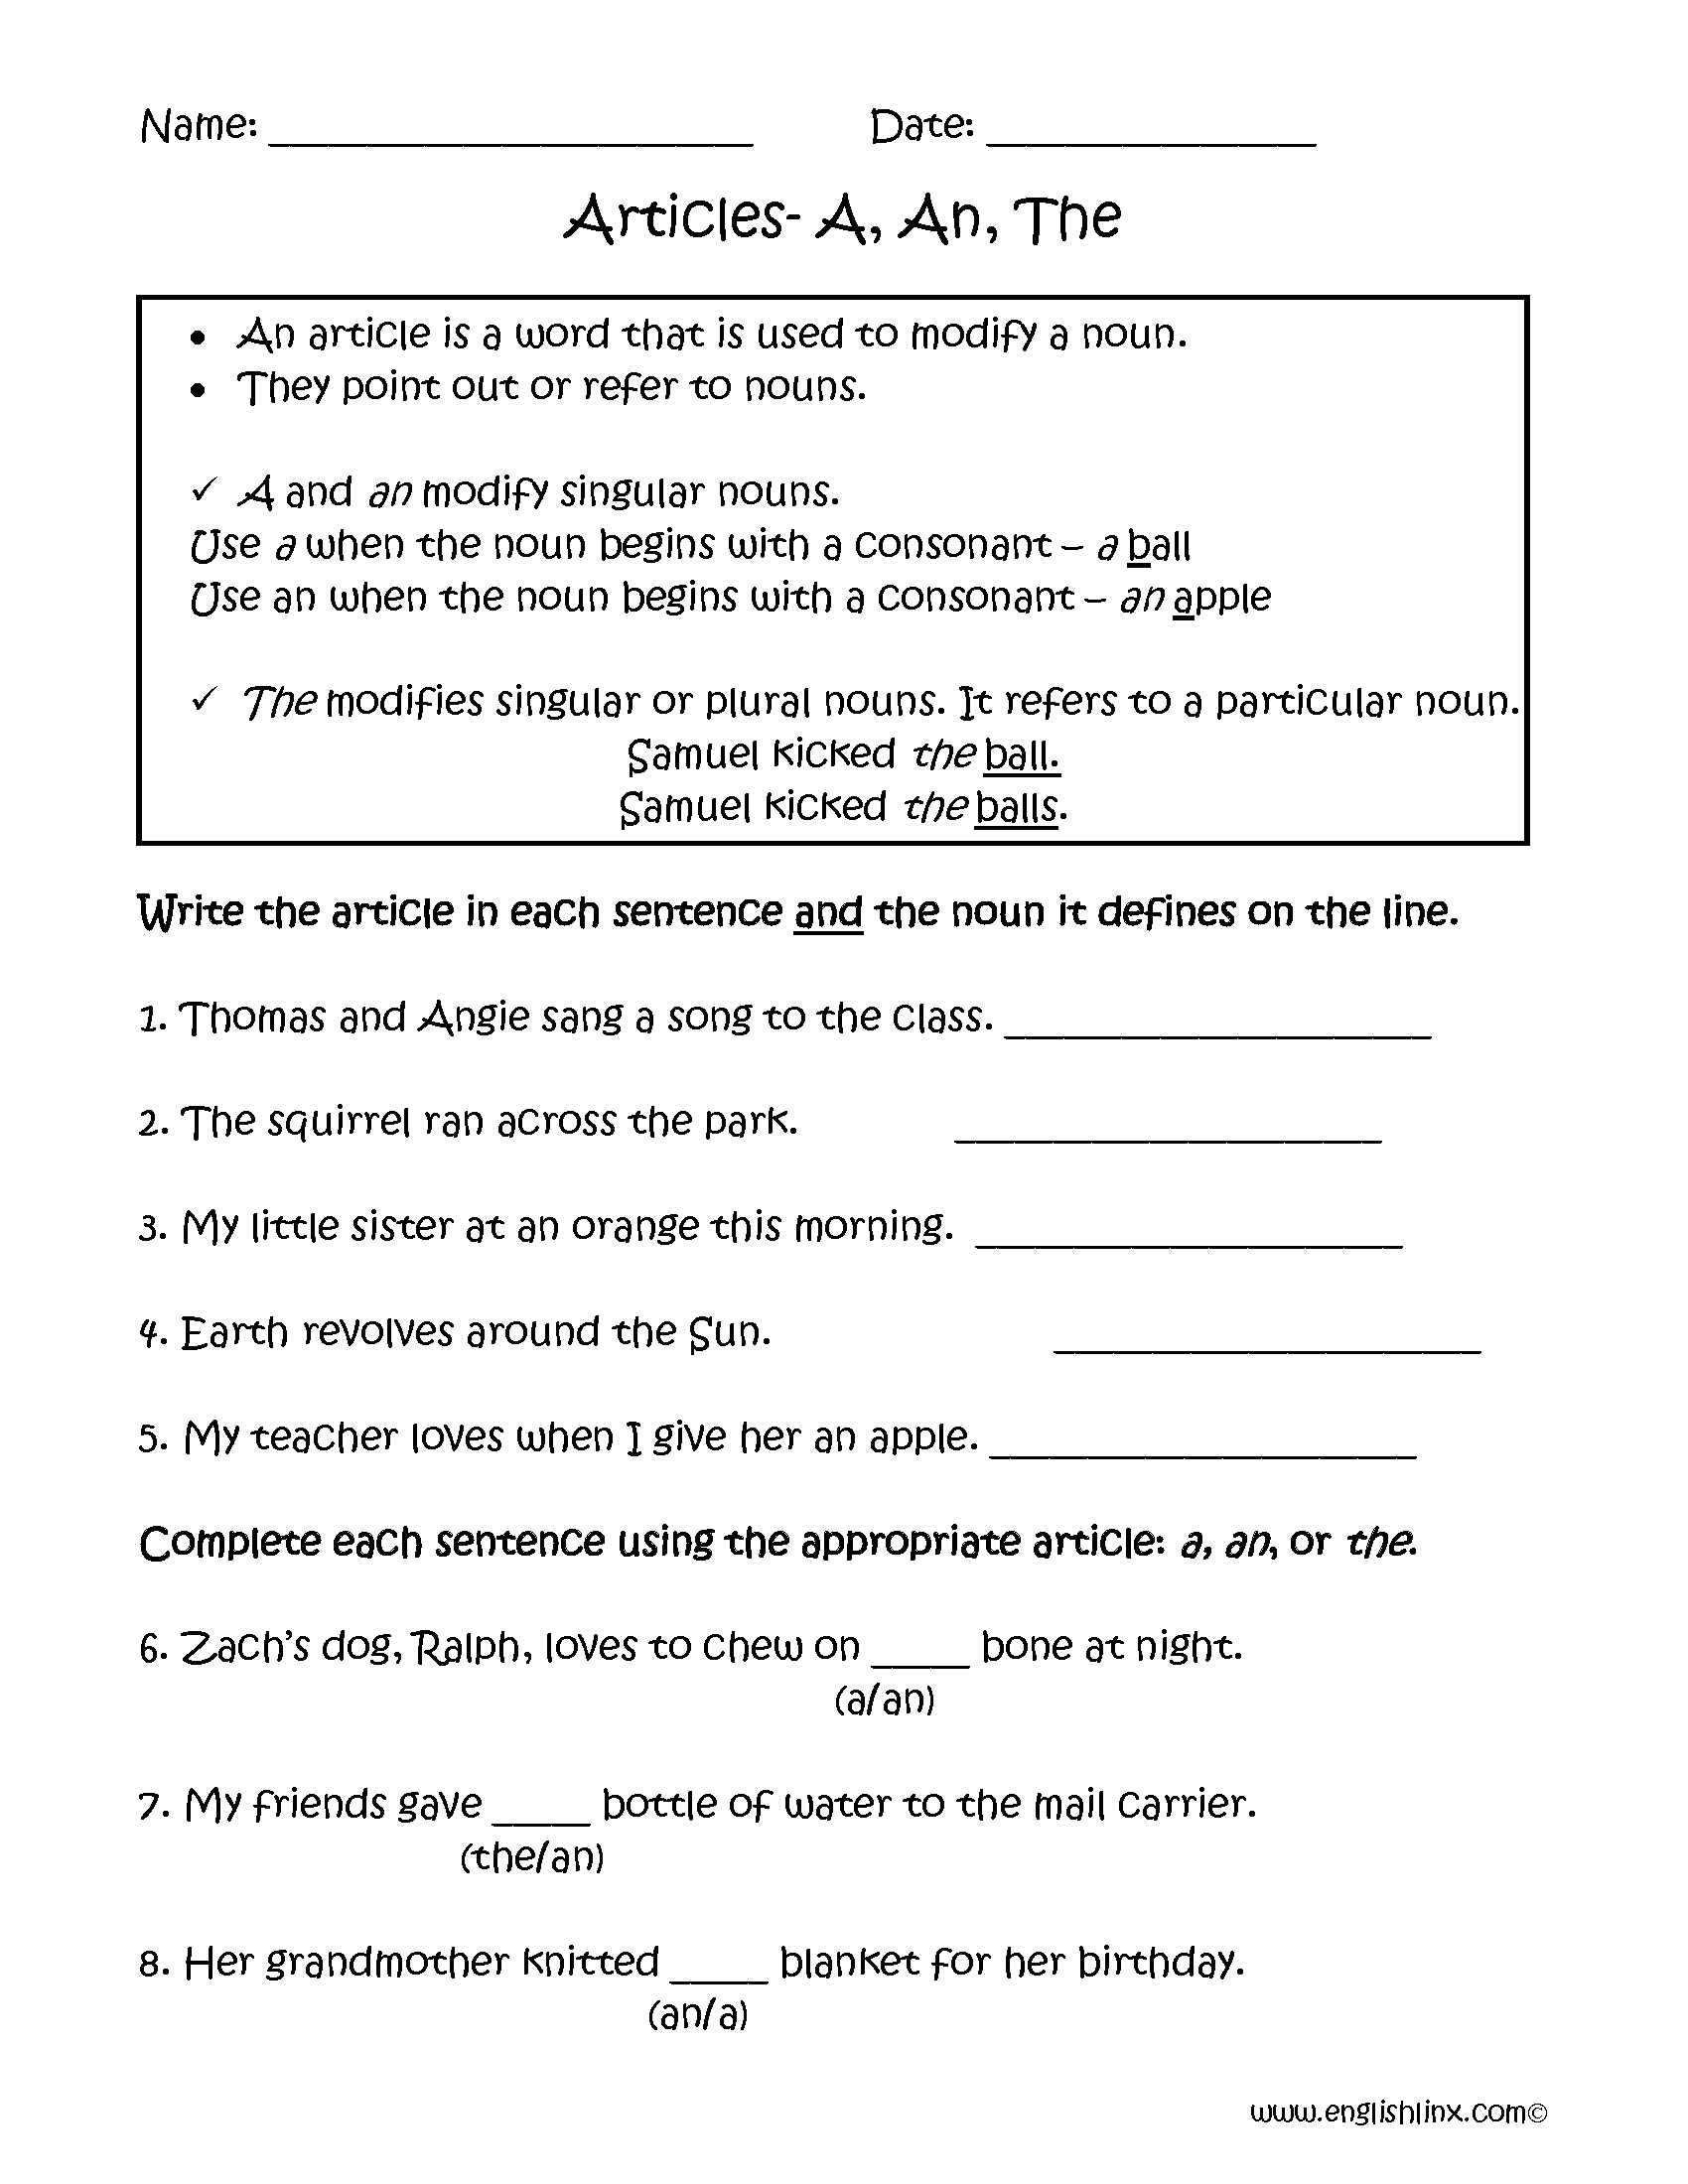 Gas Stoichiometry Worksheet with solutions and A and the Worksheets the Best Worksheets Image Collection